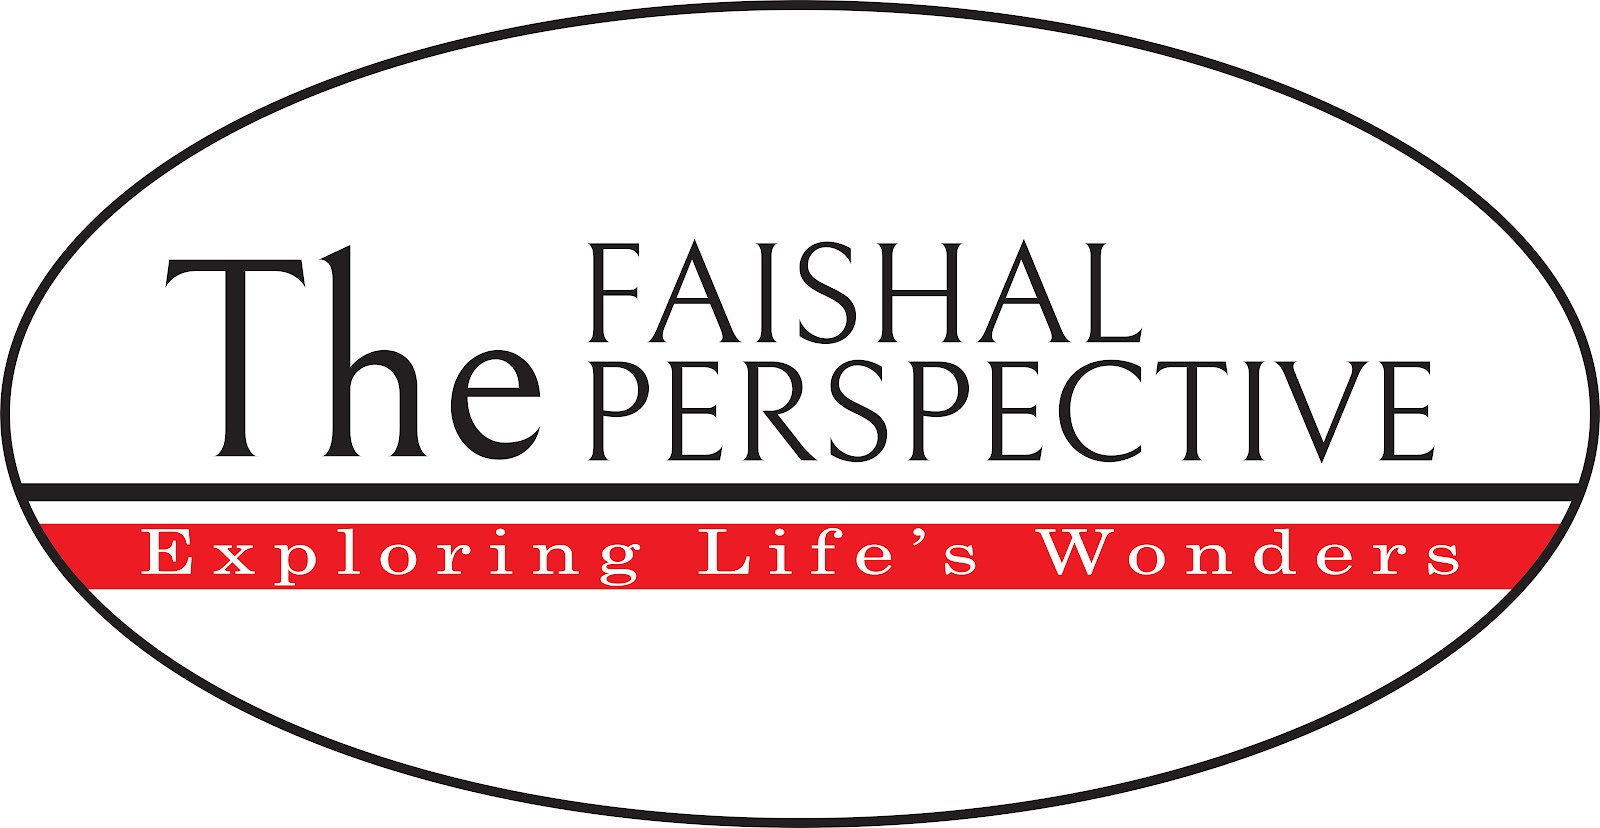 The Faishal Perspective